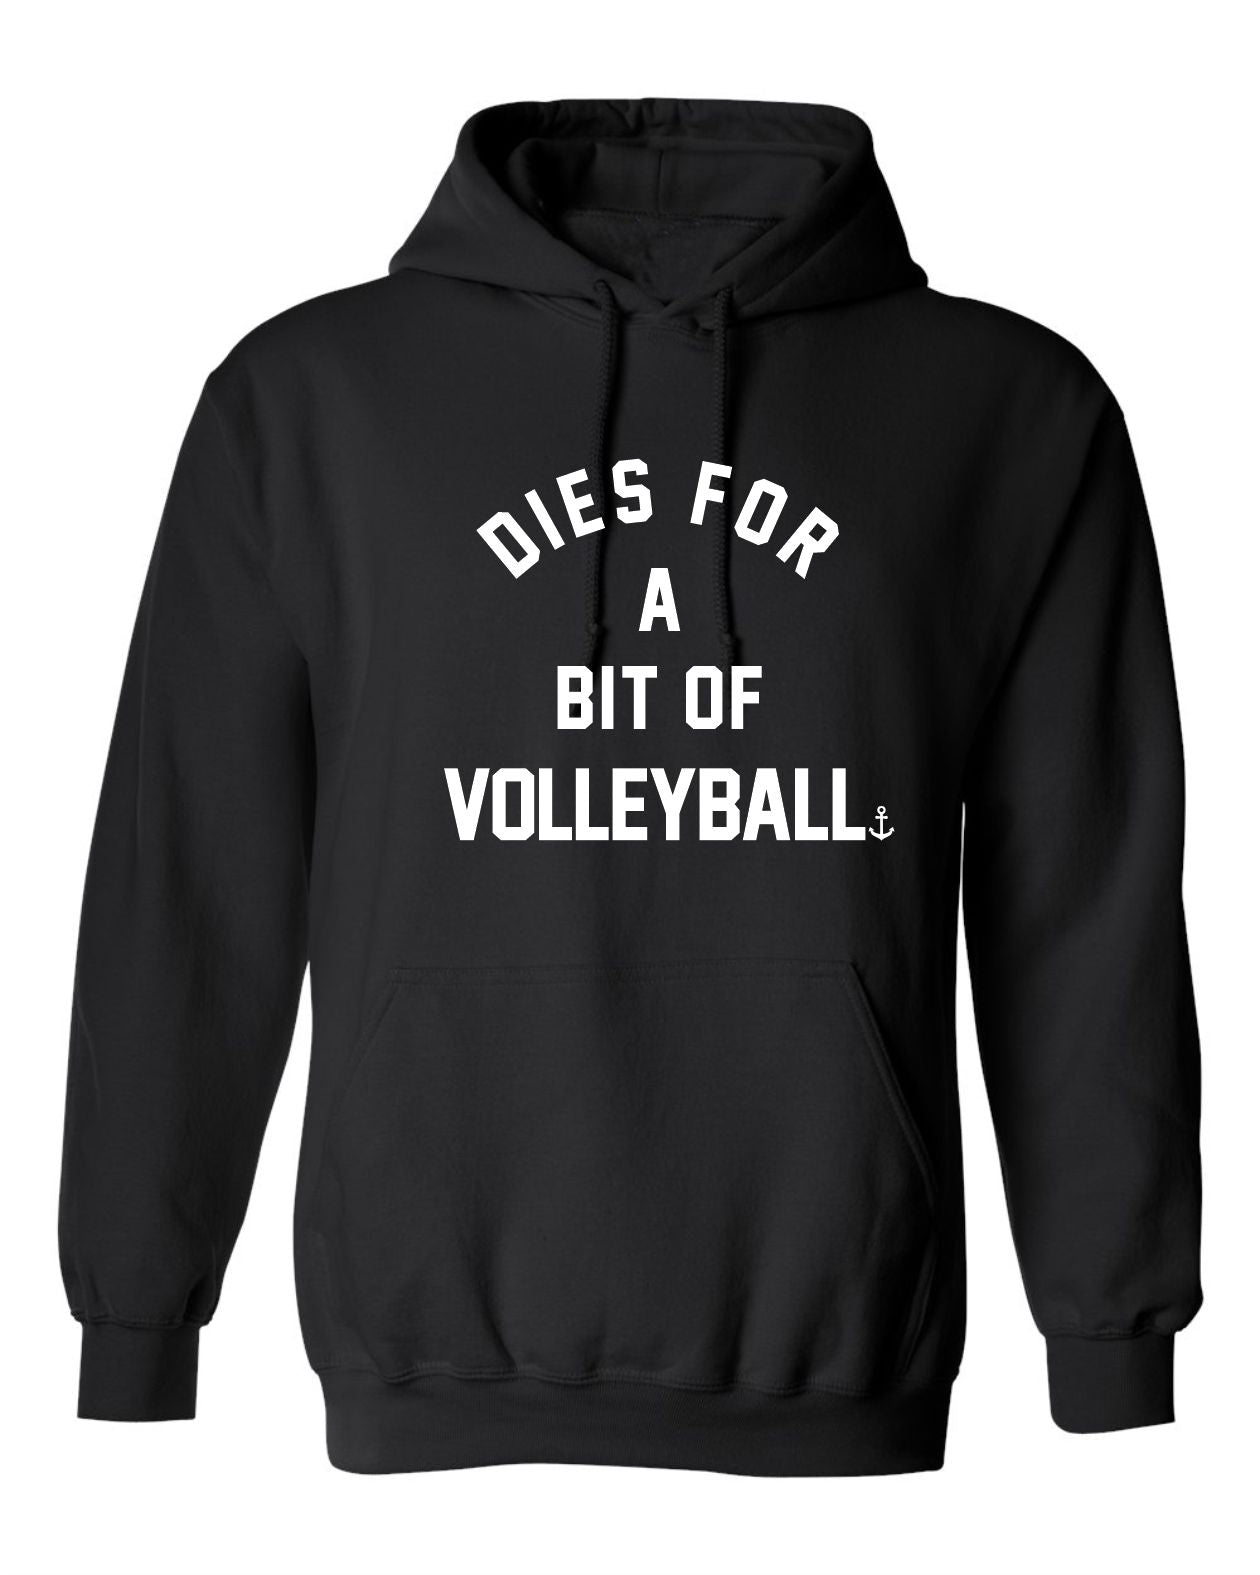 "Dies For A Bit Of Volleyball" Unisex Hoodie